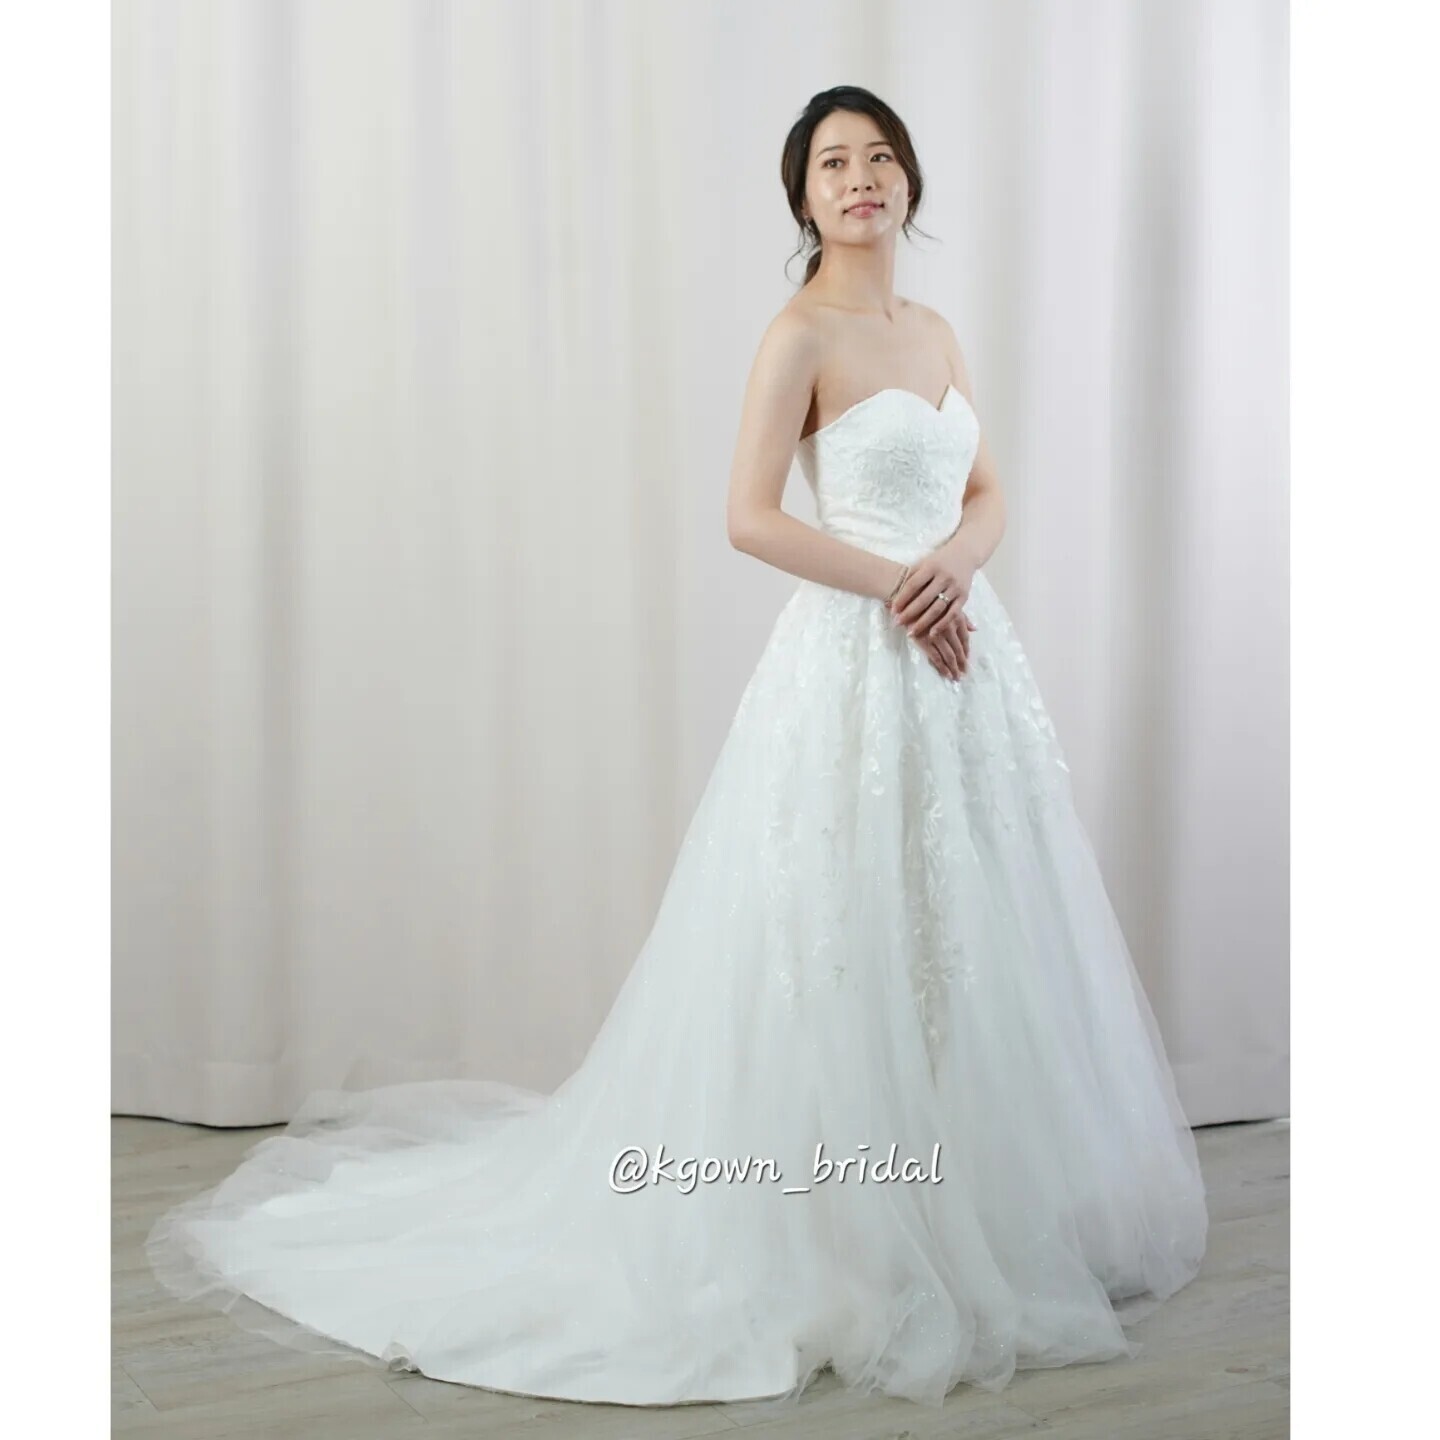 Ready-to-wear Light Dainty Lace Wedding Dress with Detachable off the shoulder sleeve